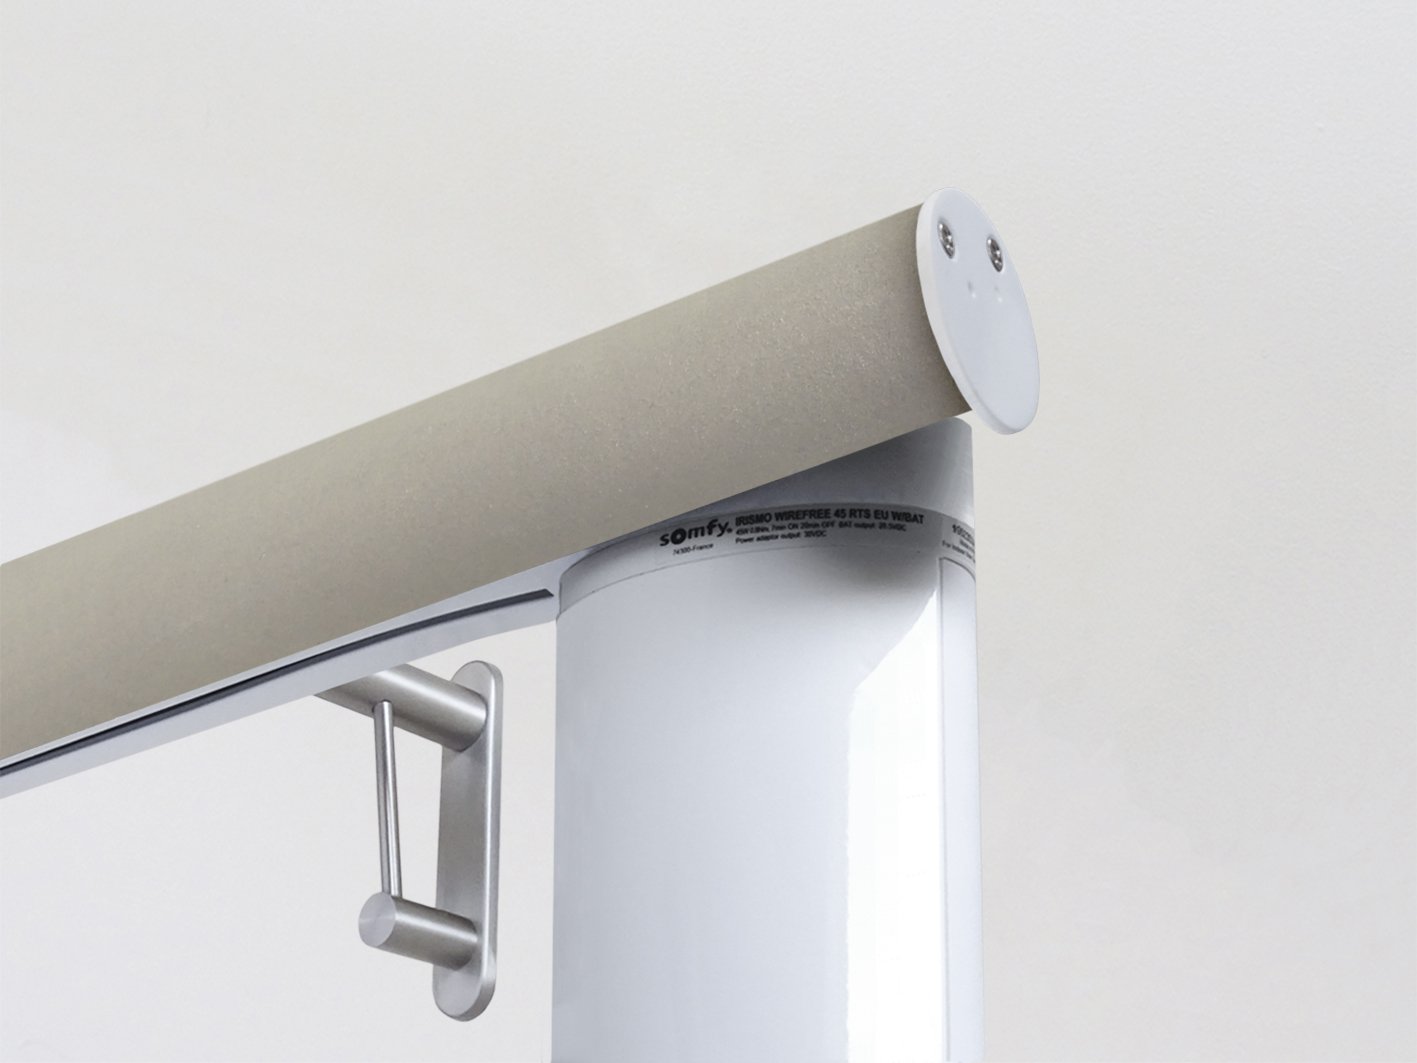 Motorised electric curtain pole in fawn beige suede, wireless & battery powered using the Somfy Glydea track | Walcot House UK curtain pole specialists